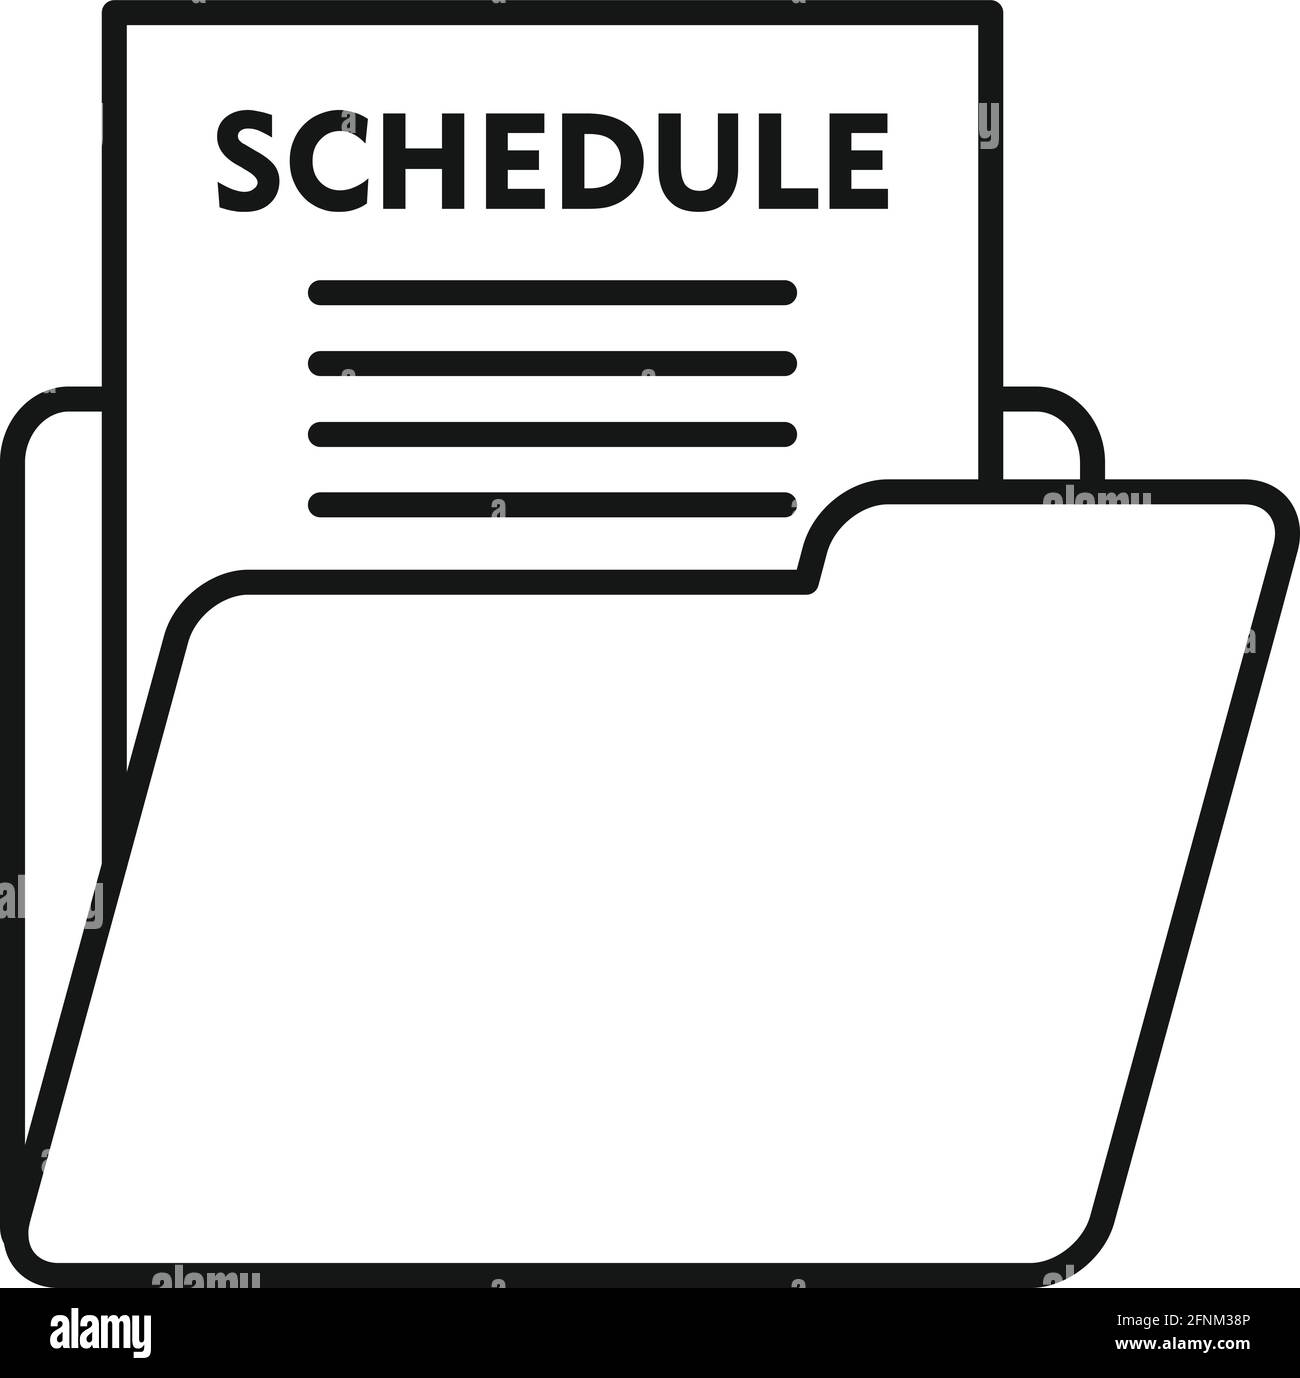 Syllabus schedule icon, outline style Stock Vector